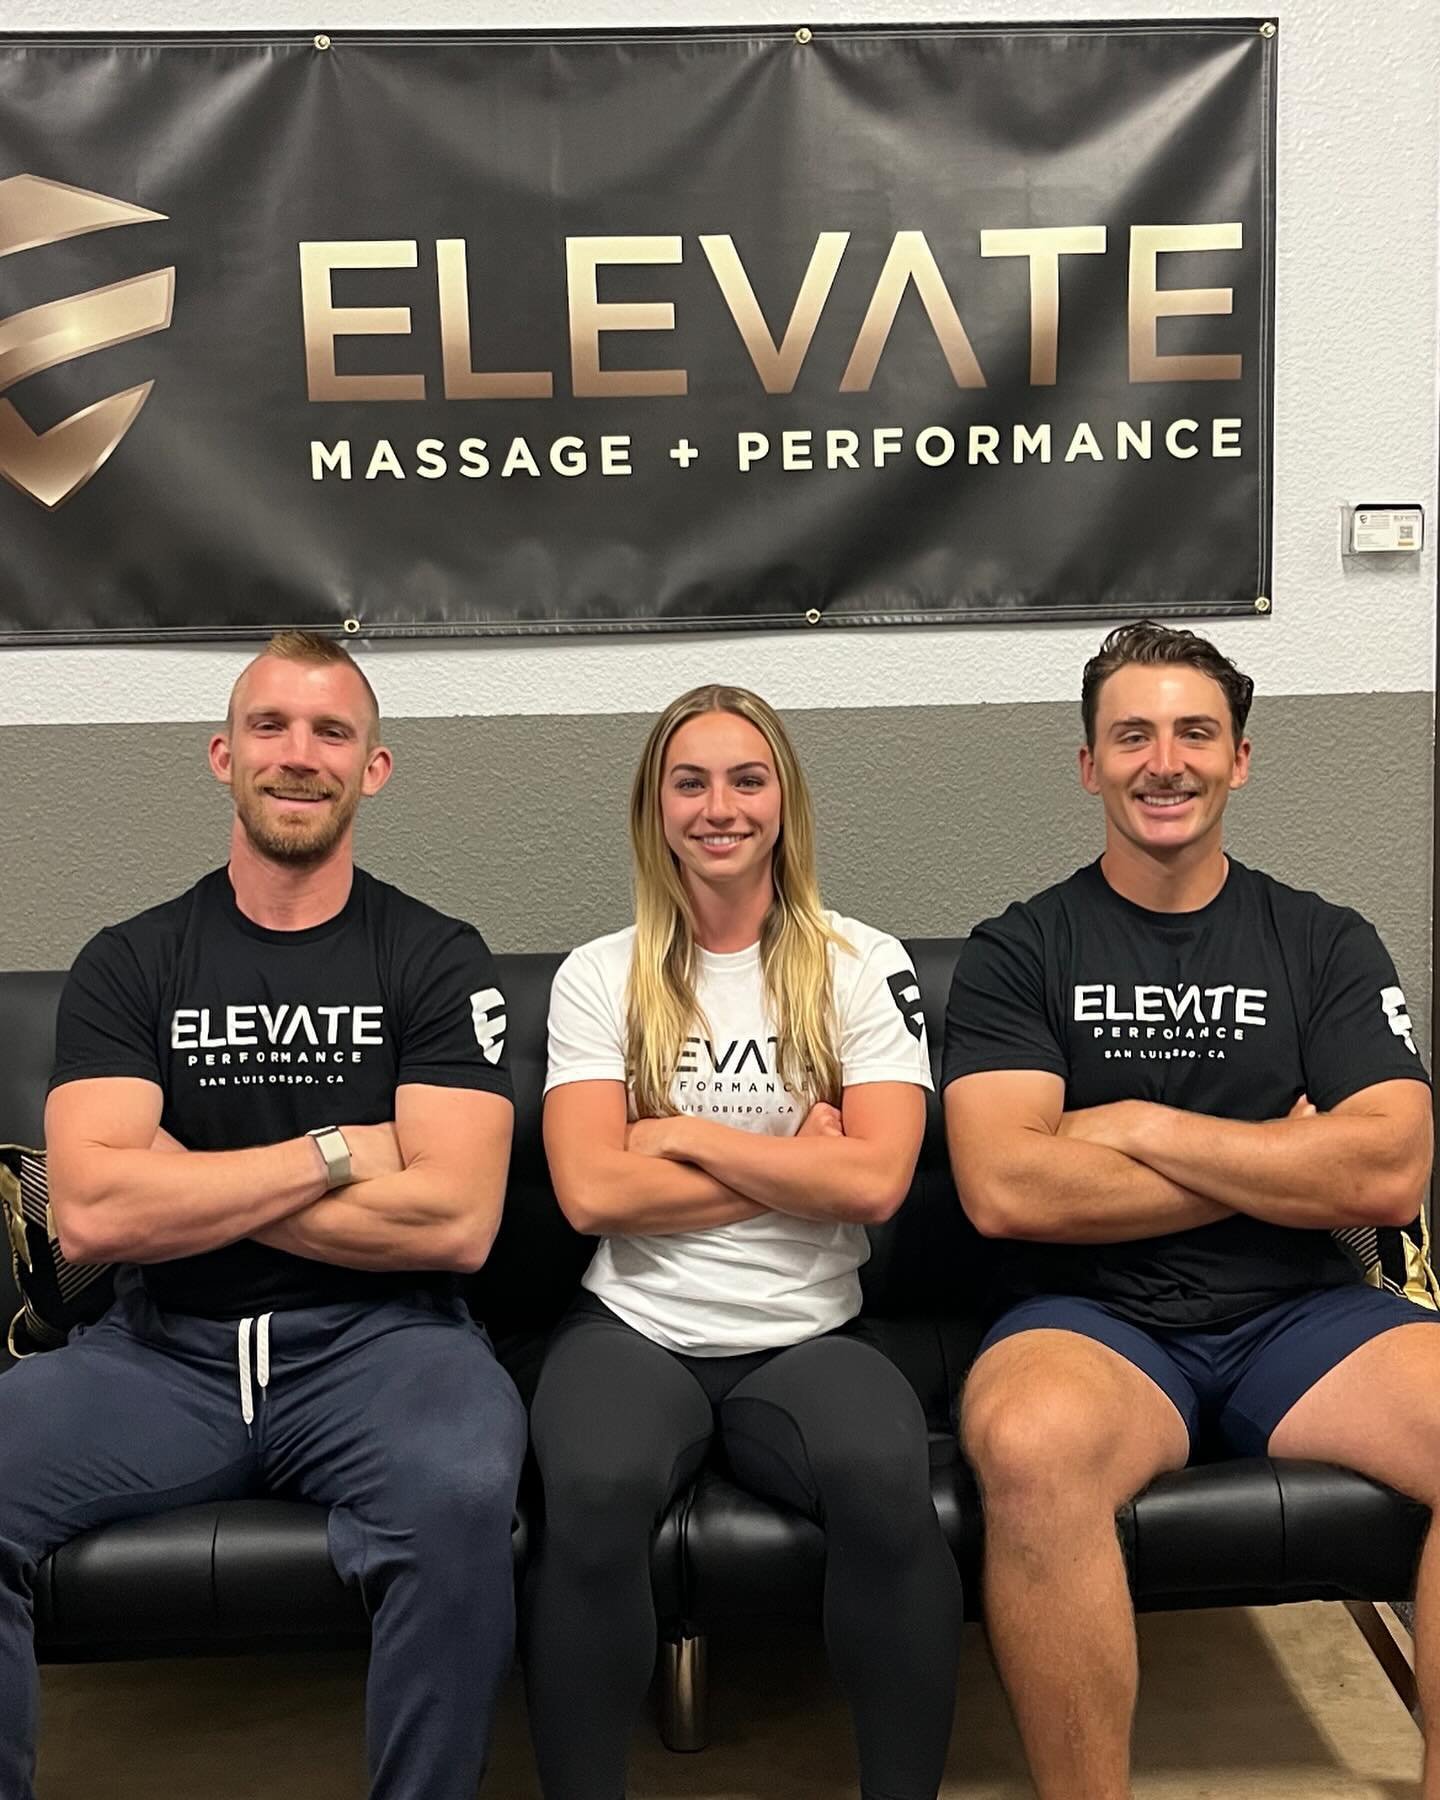 We are so delighted to introduce Elevate&rsquo;s newest massage therapist, Sophia Minnite! Sophia is a fellow Mustang studying Kinesiology at Cal Poly and is also a student-athlete on the Women&rsquo;s Cal Poly Soccer Team. Sophia is interested in ho